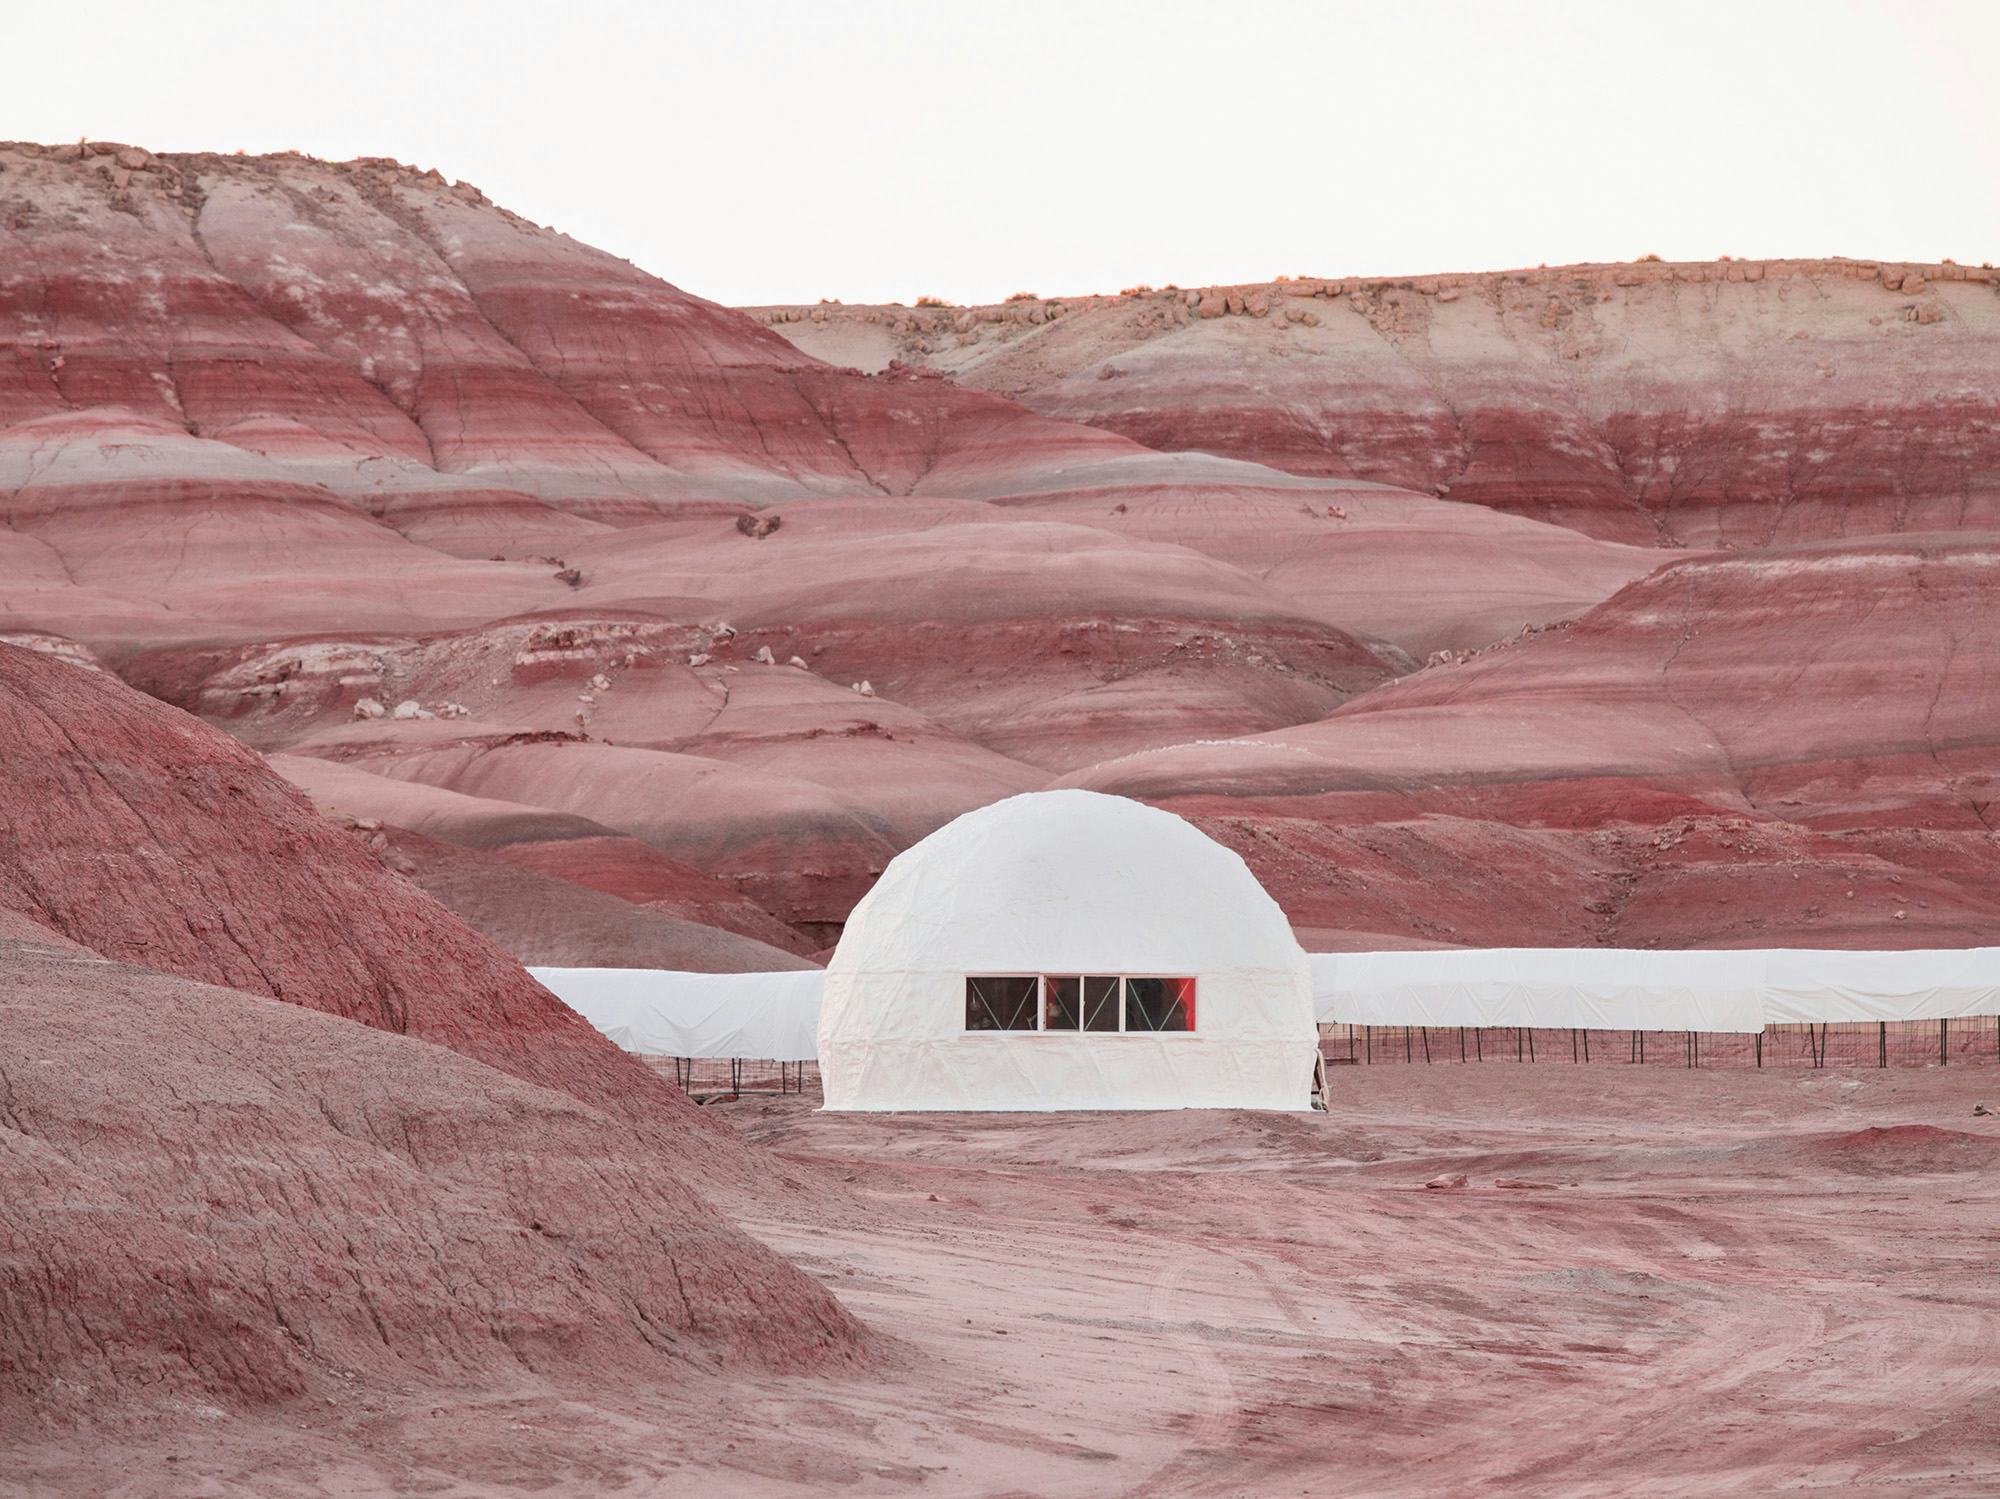 Image of red mountainous landscape with a white dome in the middle © Andrea Orejarena & Caleb Stein